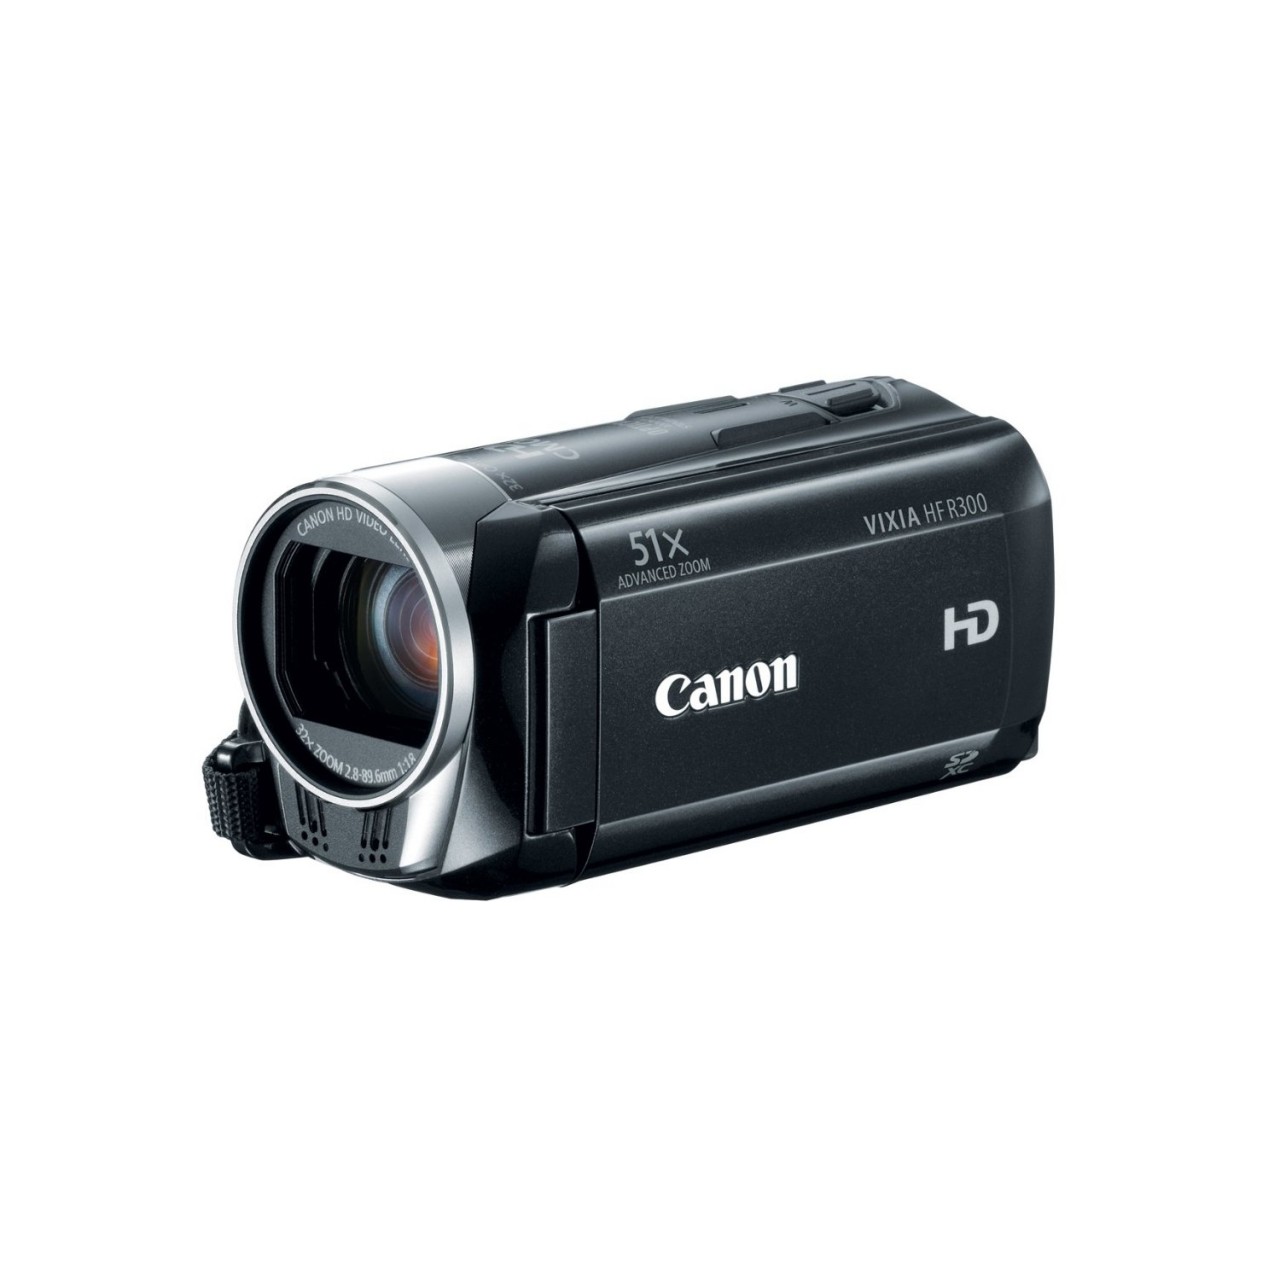  Canon HD 51x Image Stabilized Optical Zoom Camcorder